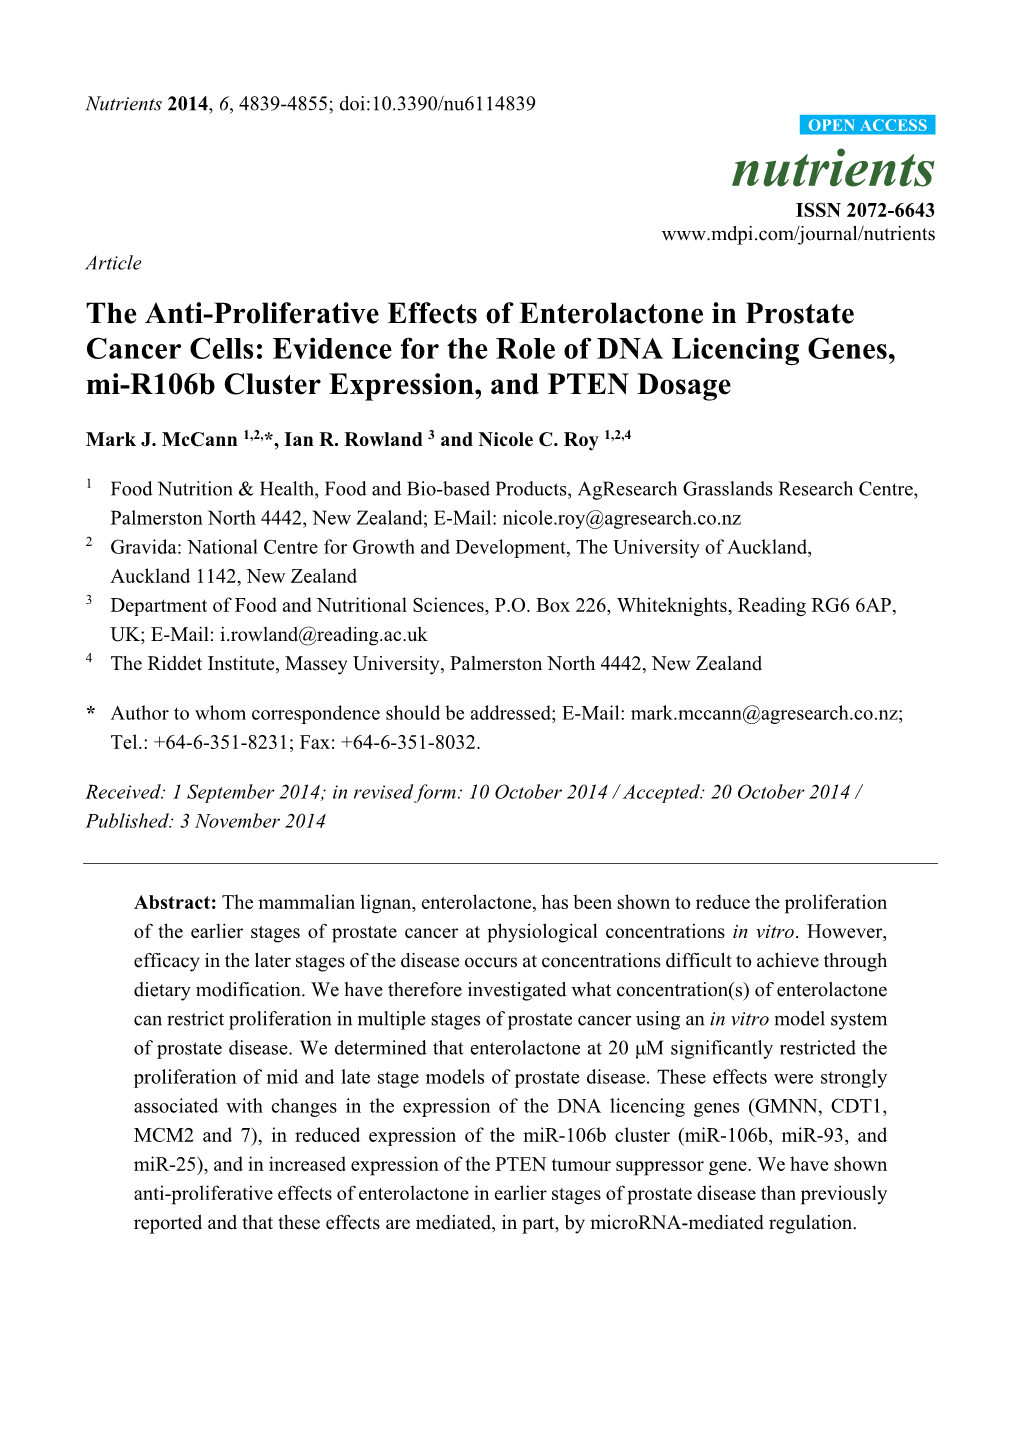 The Anti-Proliferative Effects of Enterolactone in Prostate Cancer Cells: Evidence for the Role of DNA Licencing Genes, Mi-R106b Cluster Expression, and PTEN Dosage